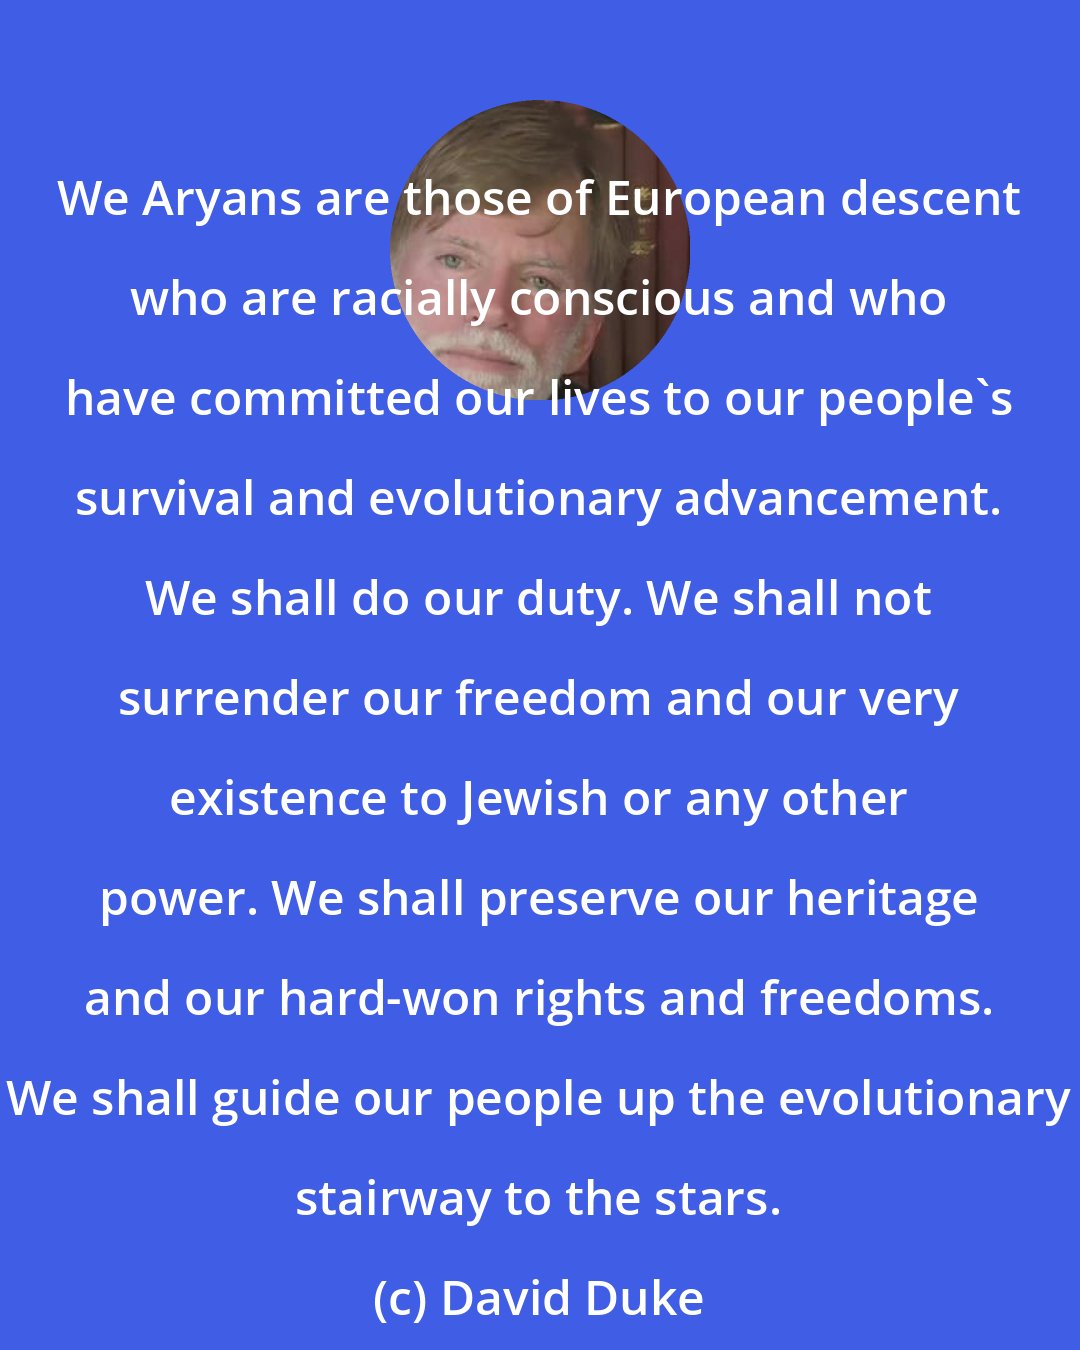 David Duke: We Aryans are those of European descent who are racially conscious and who have committed our lives to our people's survival and evolutionary advancement. We shall do our duty. We shall not surrender our freedom and our very existence to Jewish or any other power. We shall preserve our heritage and our hard-won rights and freedoms. We shall guide our people up the evolutionary stairway to the stars.